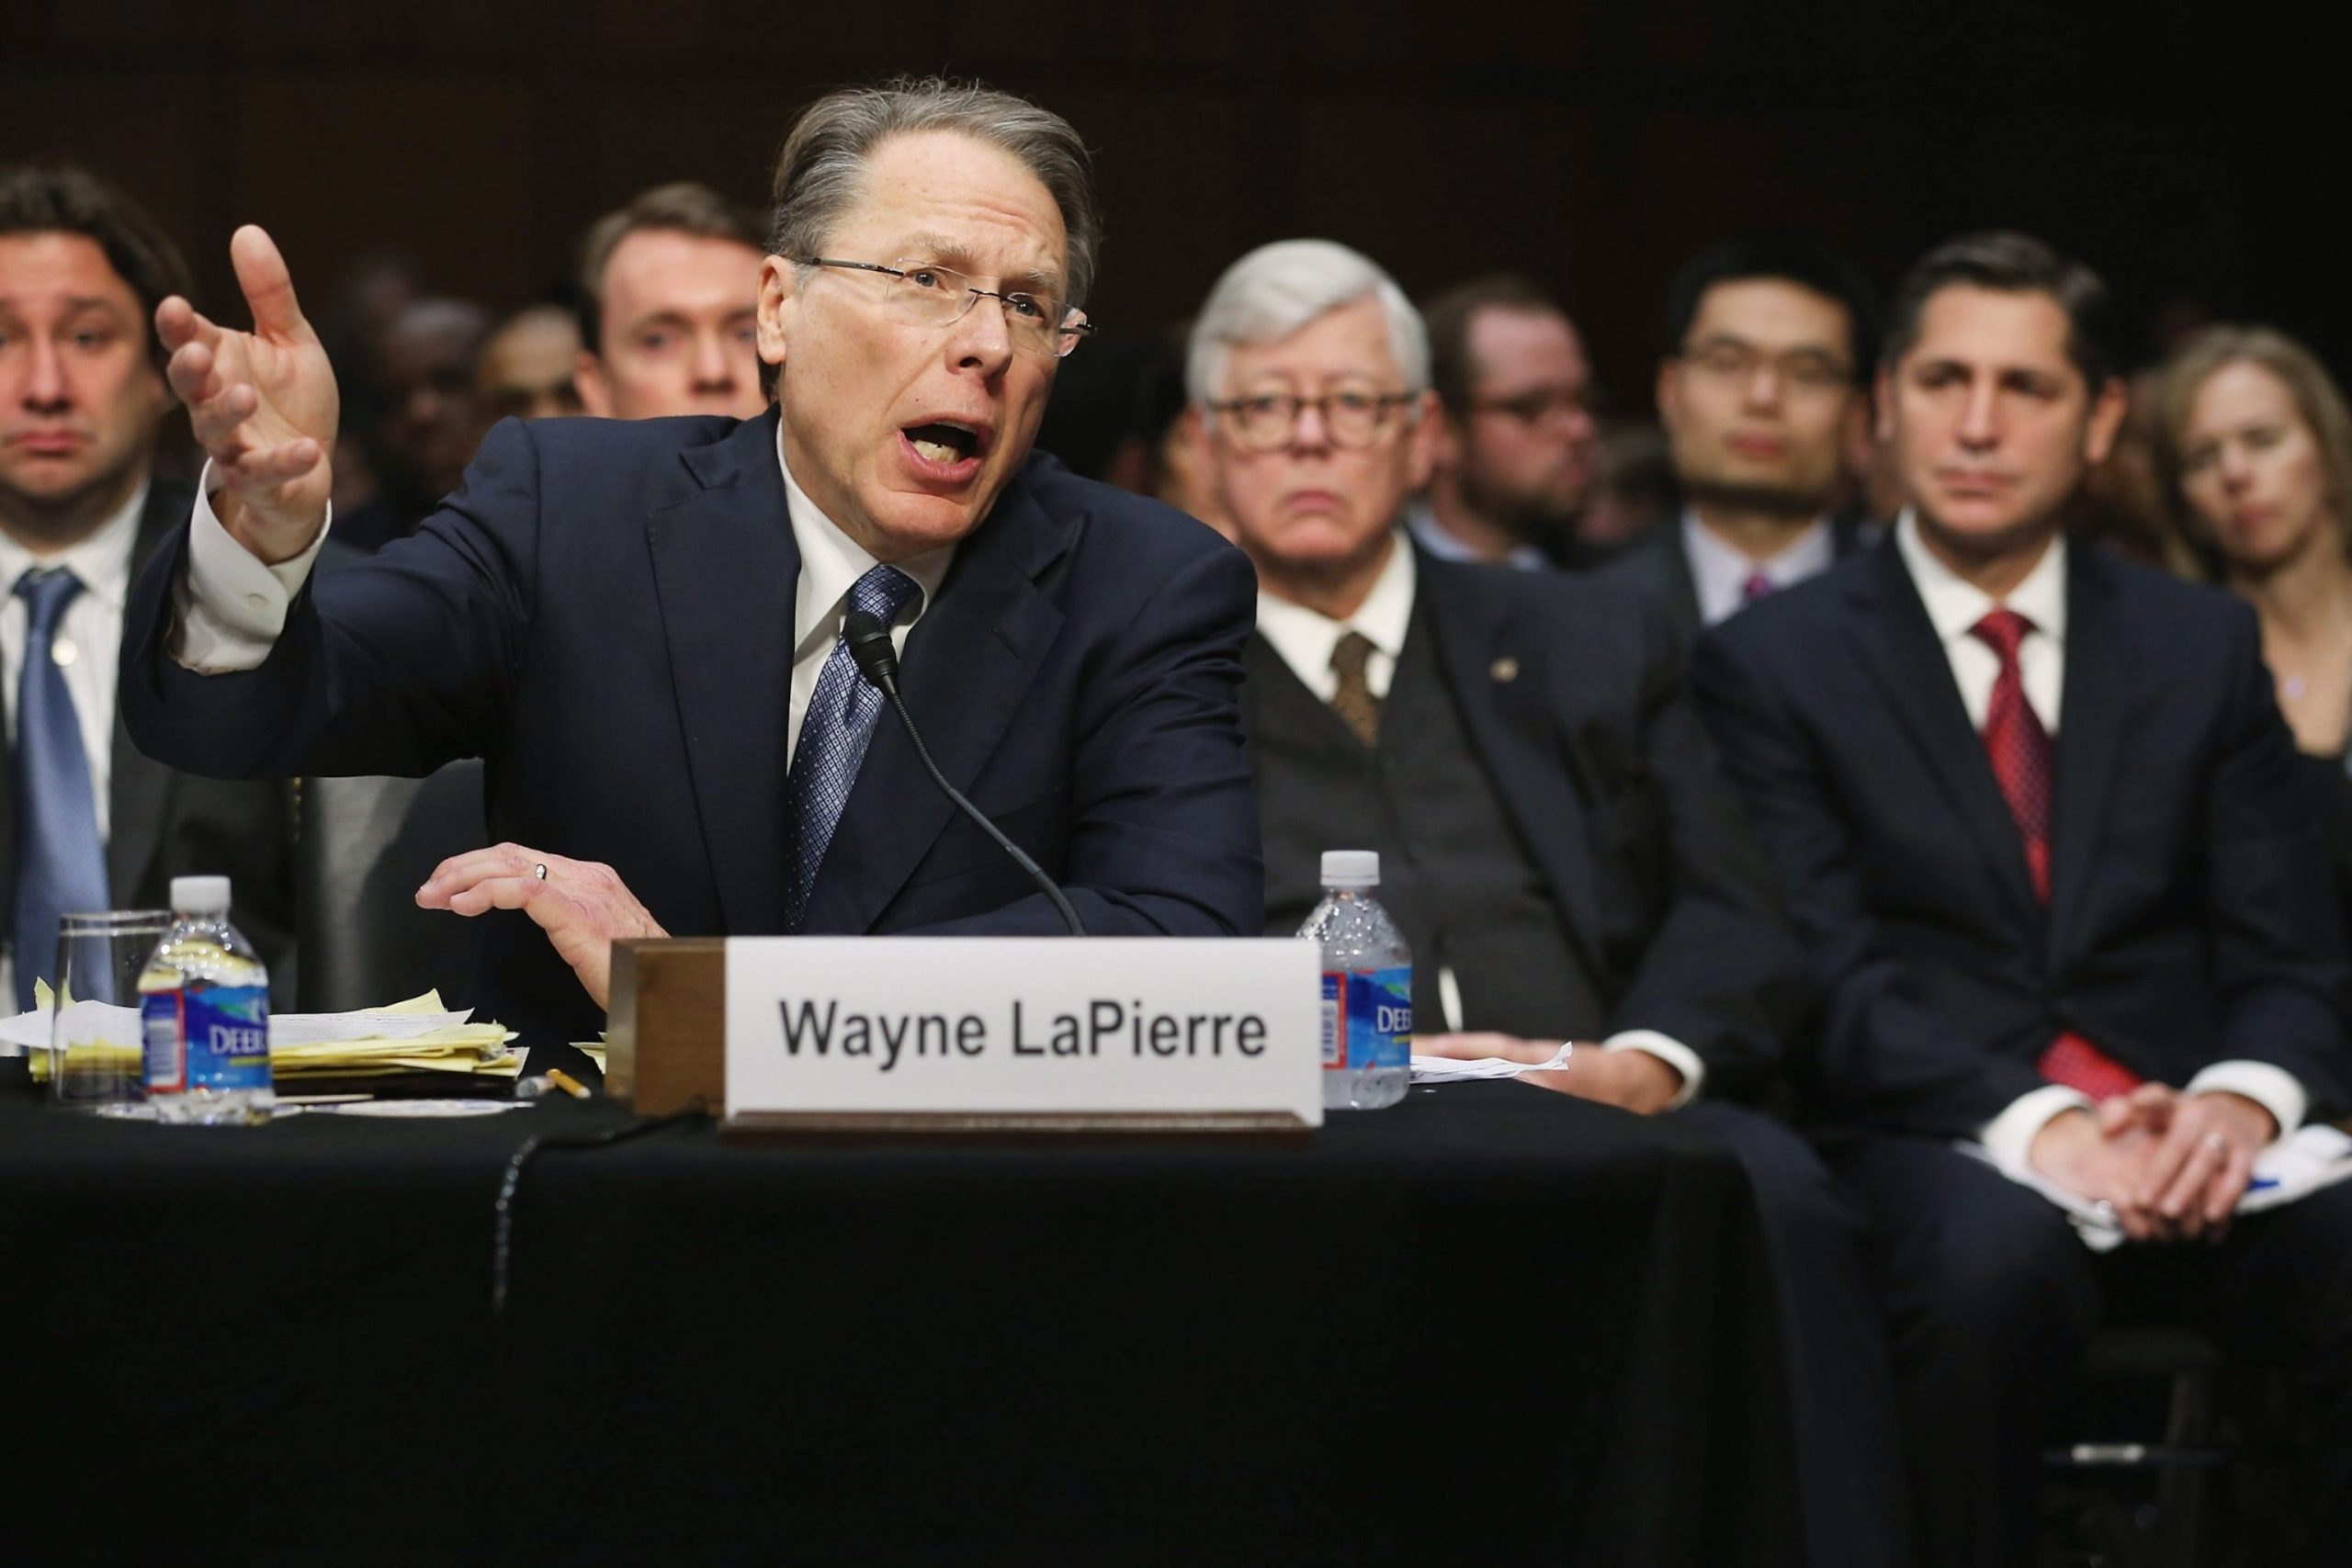 Wayne LaPierre, NRA Chief, Resigns Shortly Before Civil Corruption Trial